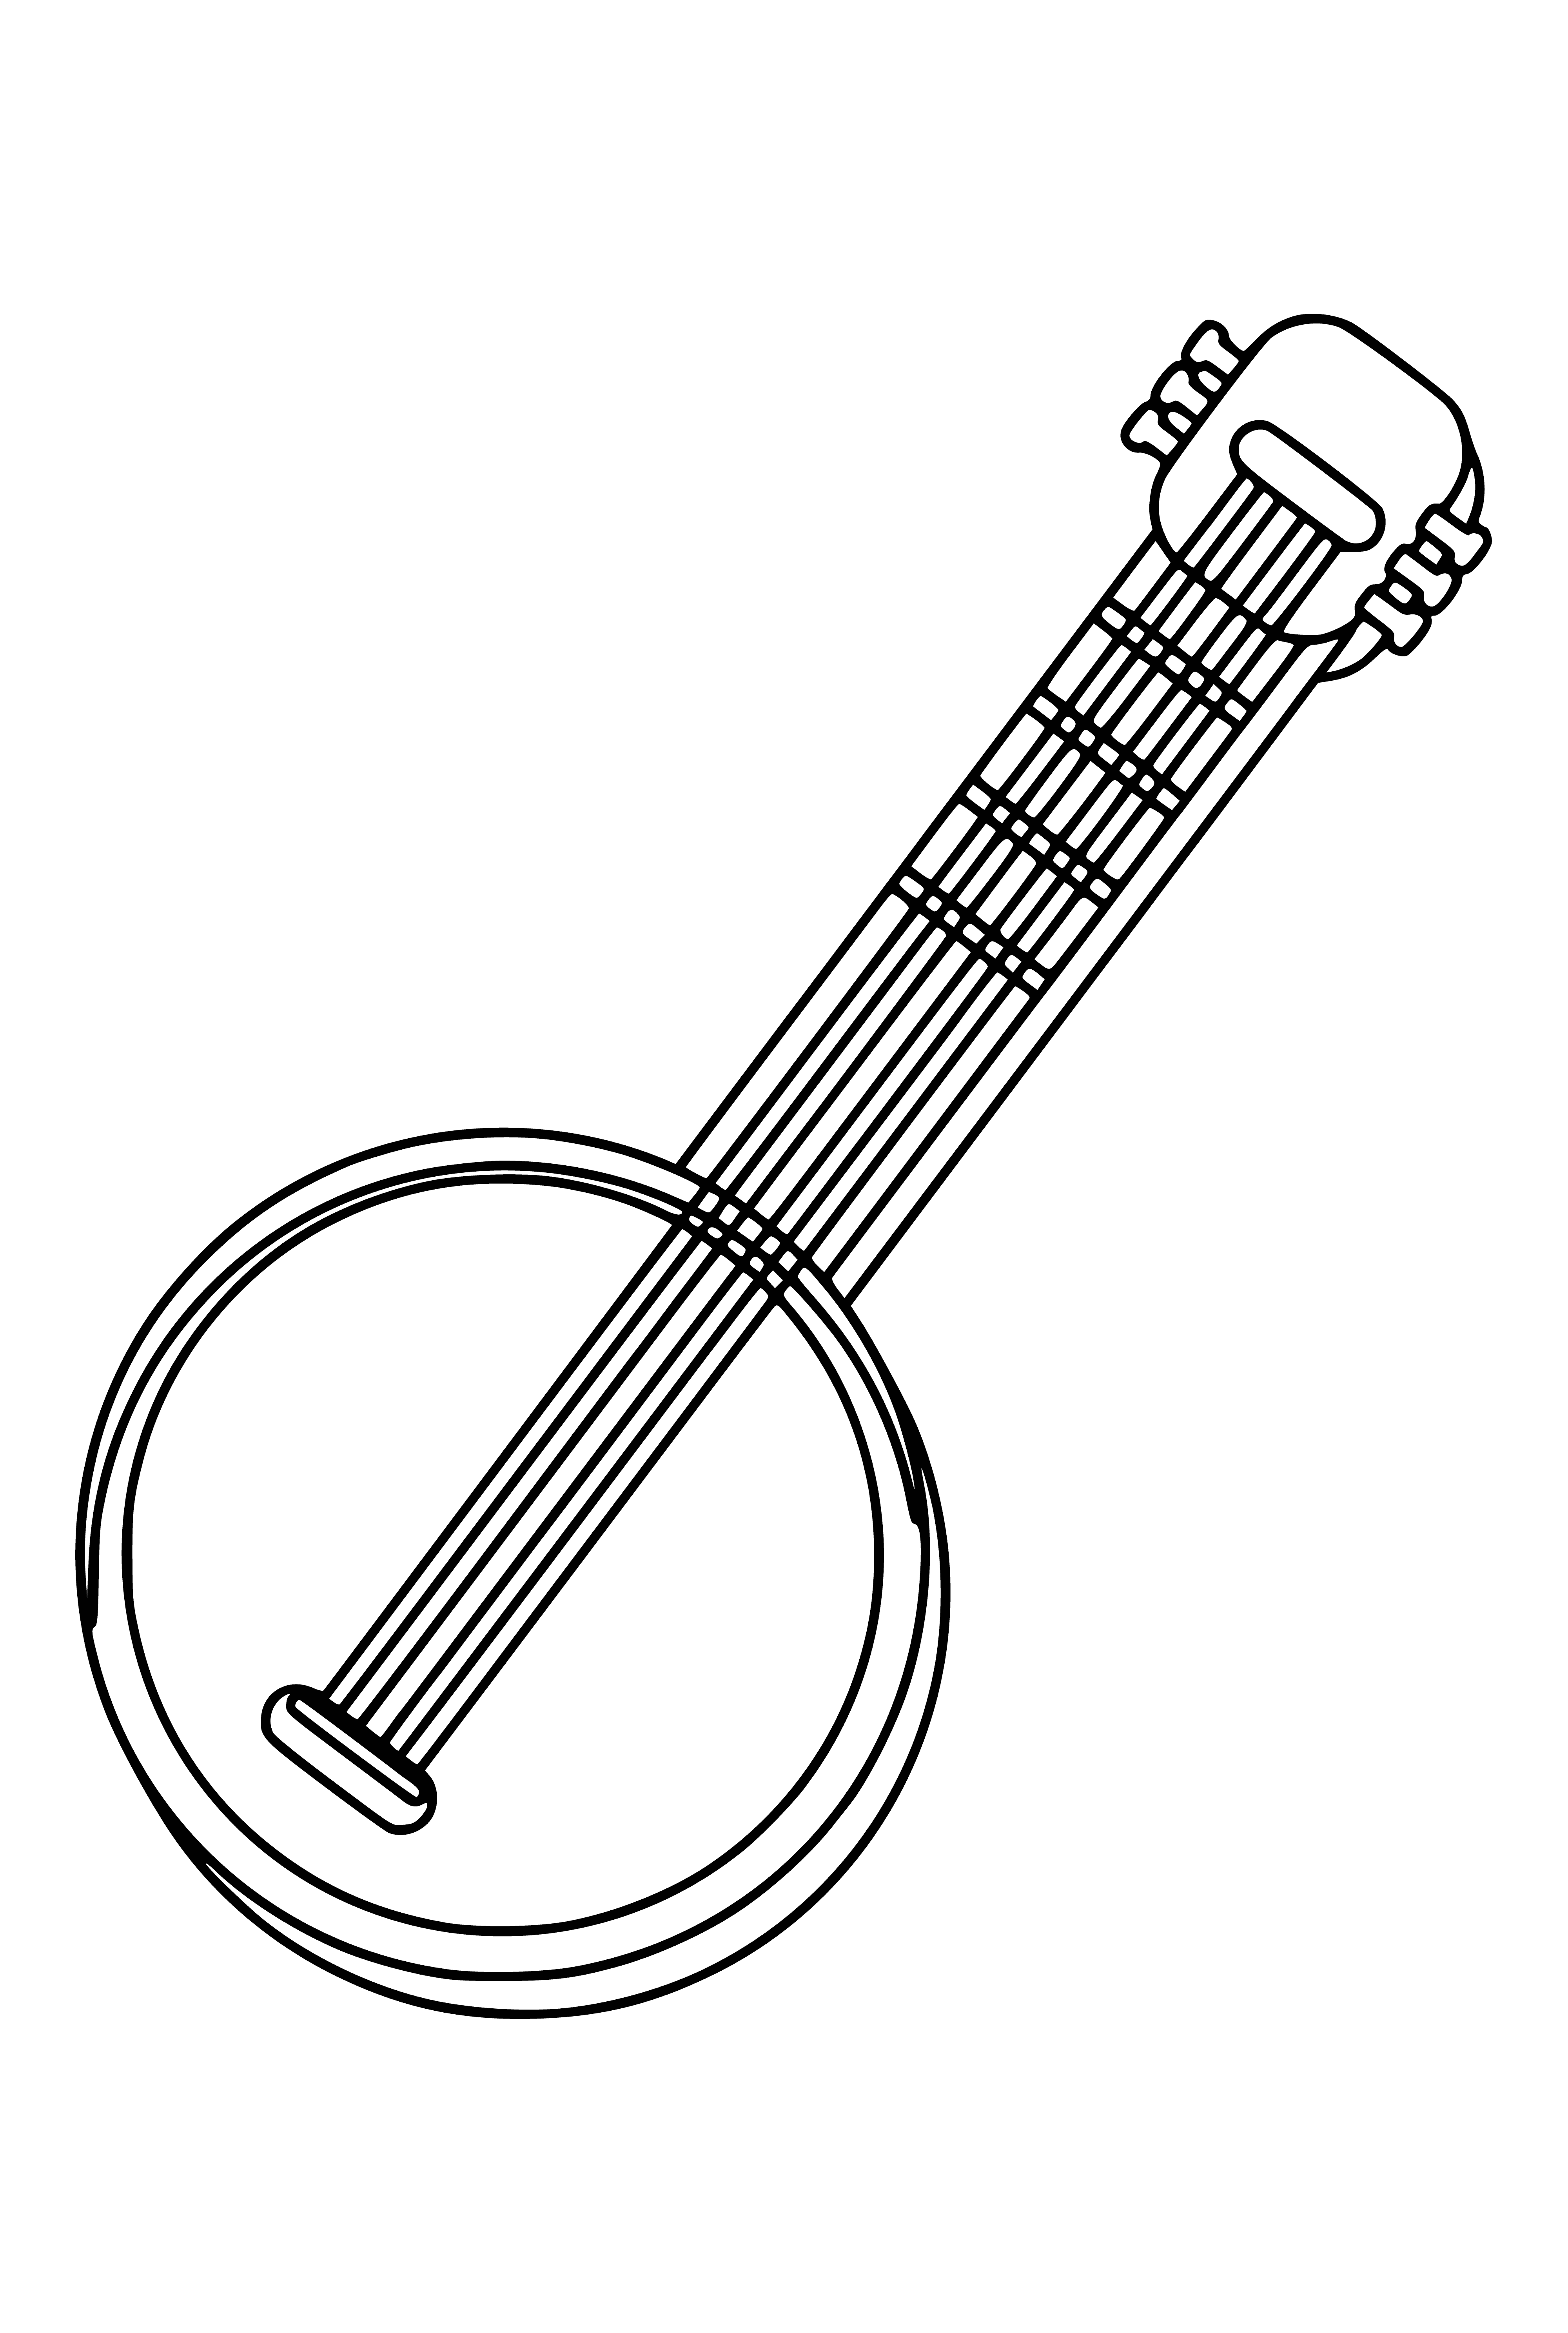 coloring page: The banjo is popular in folk music, with its long neck, round body & 4 plucked strings.